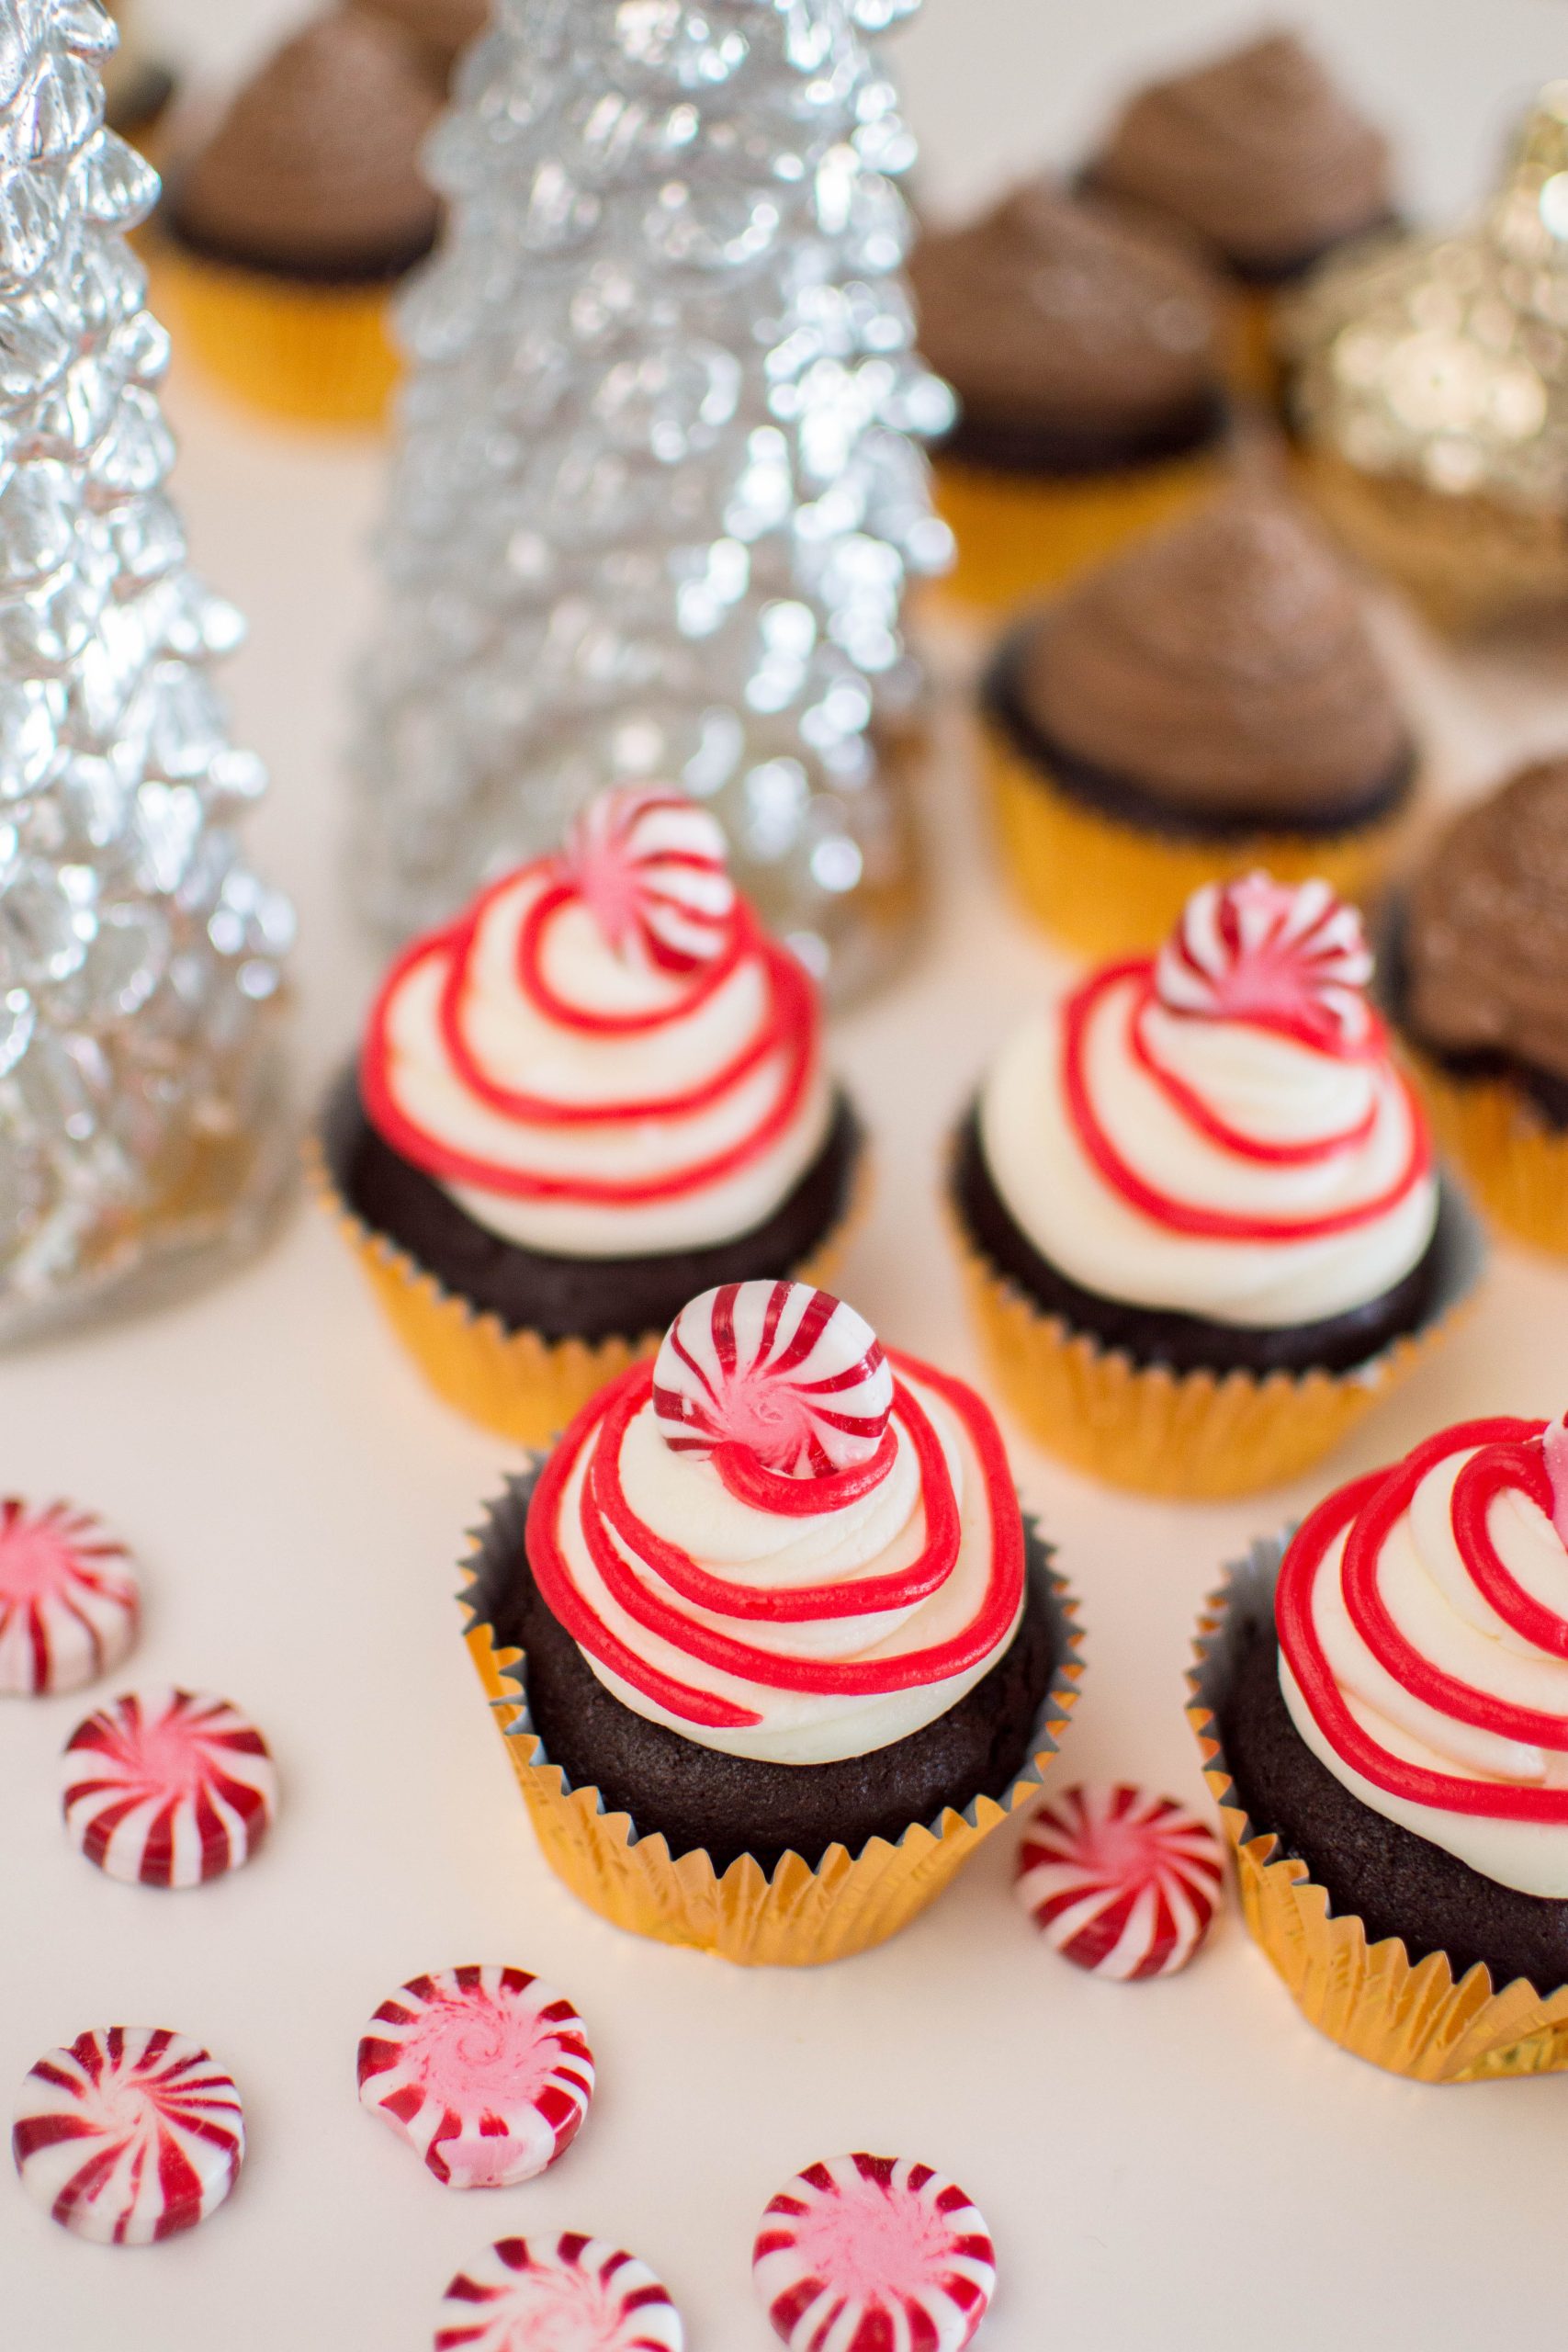 These Chocolate Peppermint Cupcakes are jam-packed full of flavor and just oh-so-perfect for the holiday season! They’re the perfect addition to any Christmas dessert table!